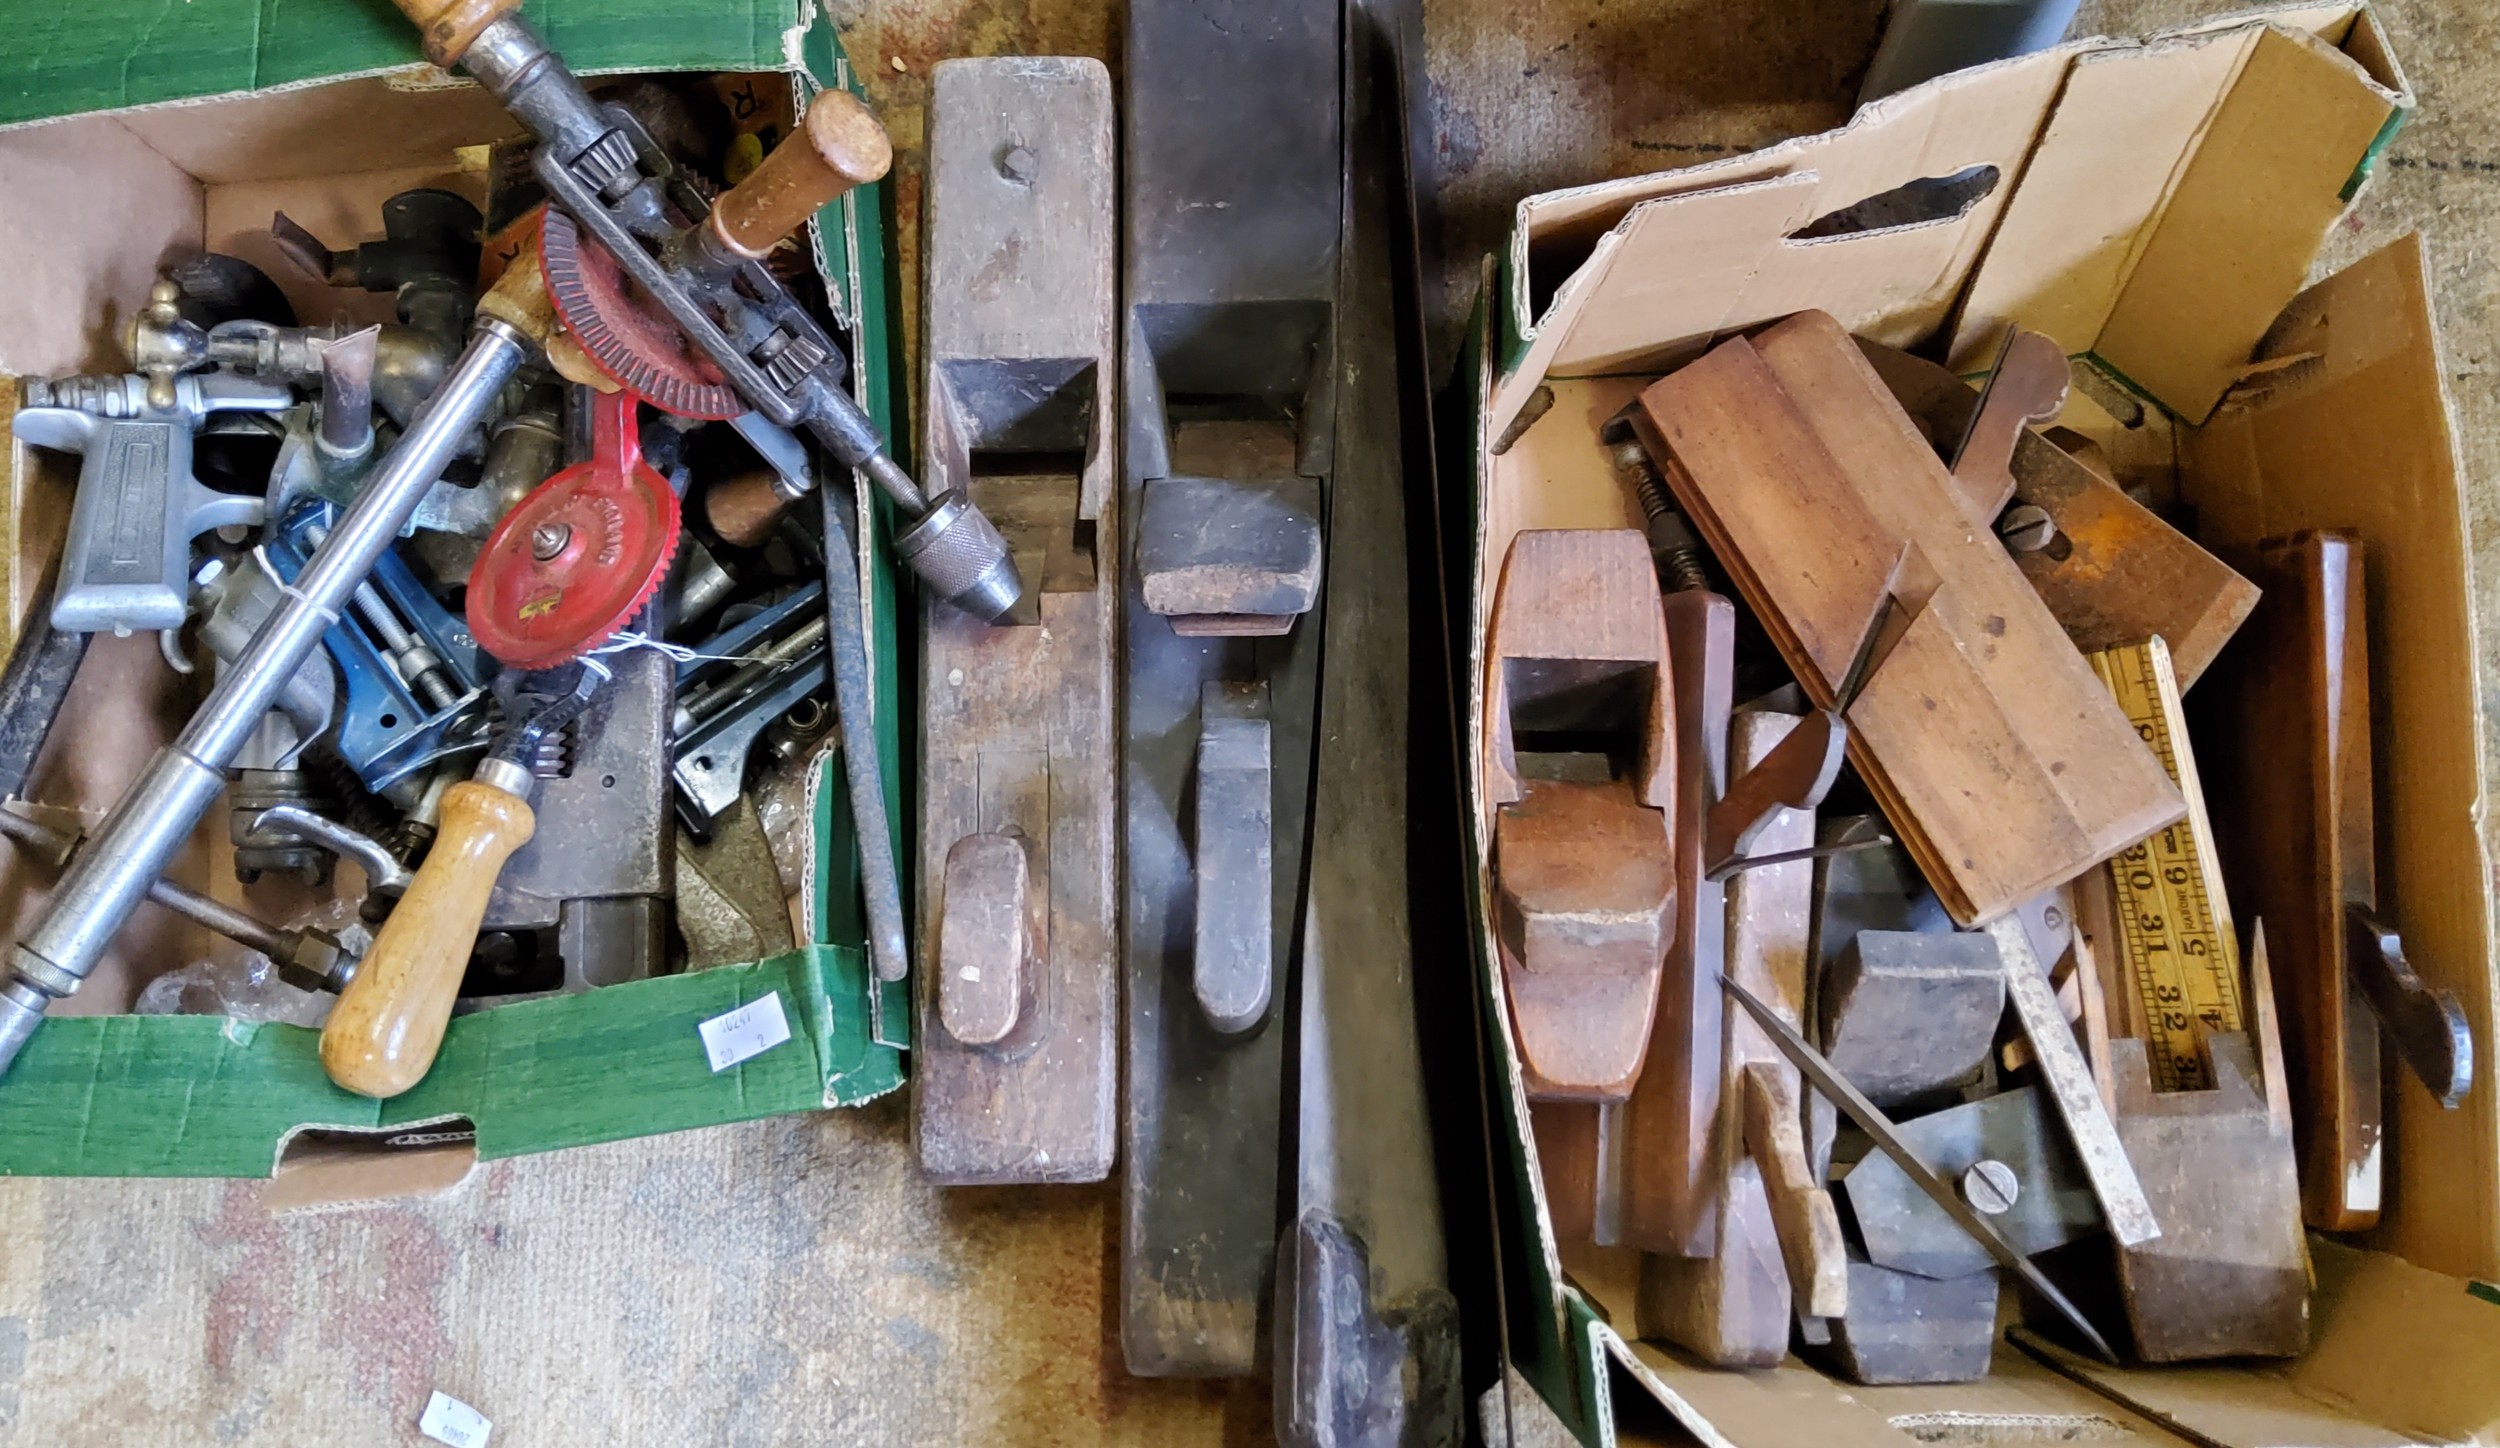 Tools - saws, planes, clamps;  hand drills;  a Harper mincer;  a large wooden bobbin;  an Industrial